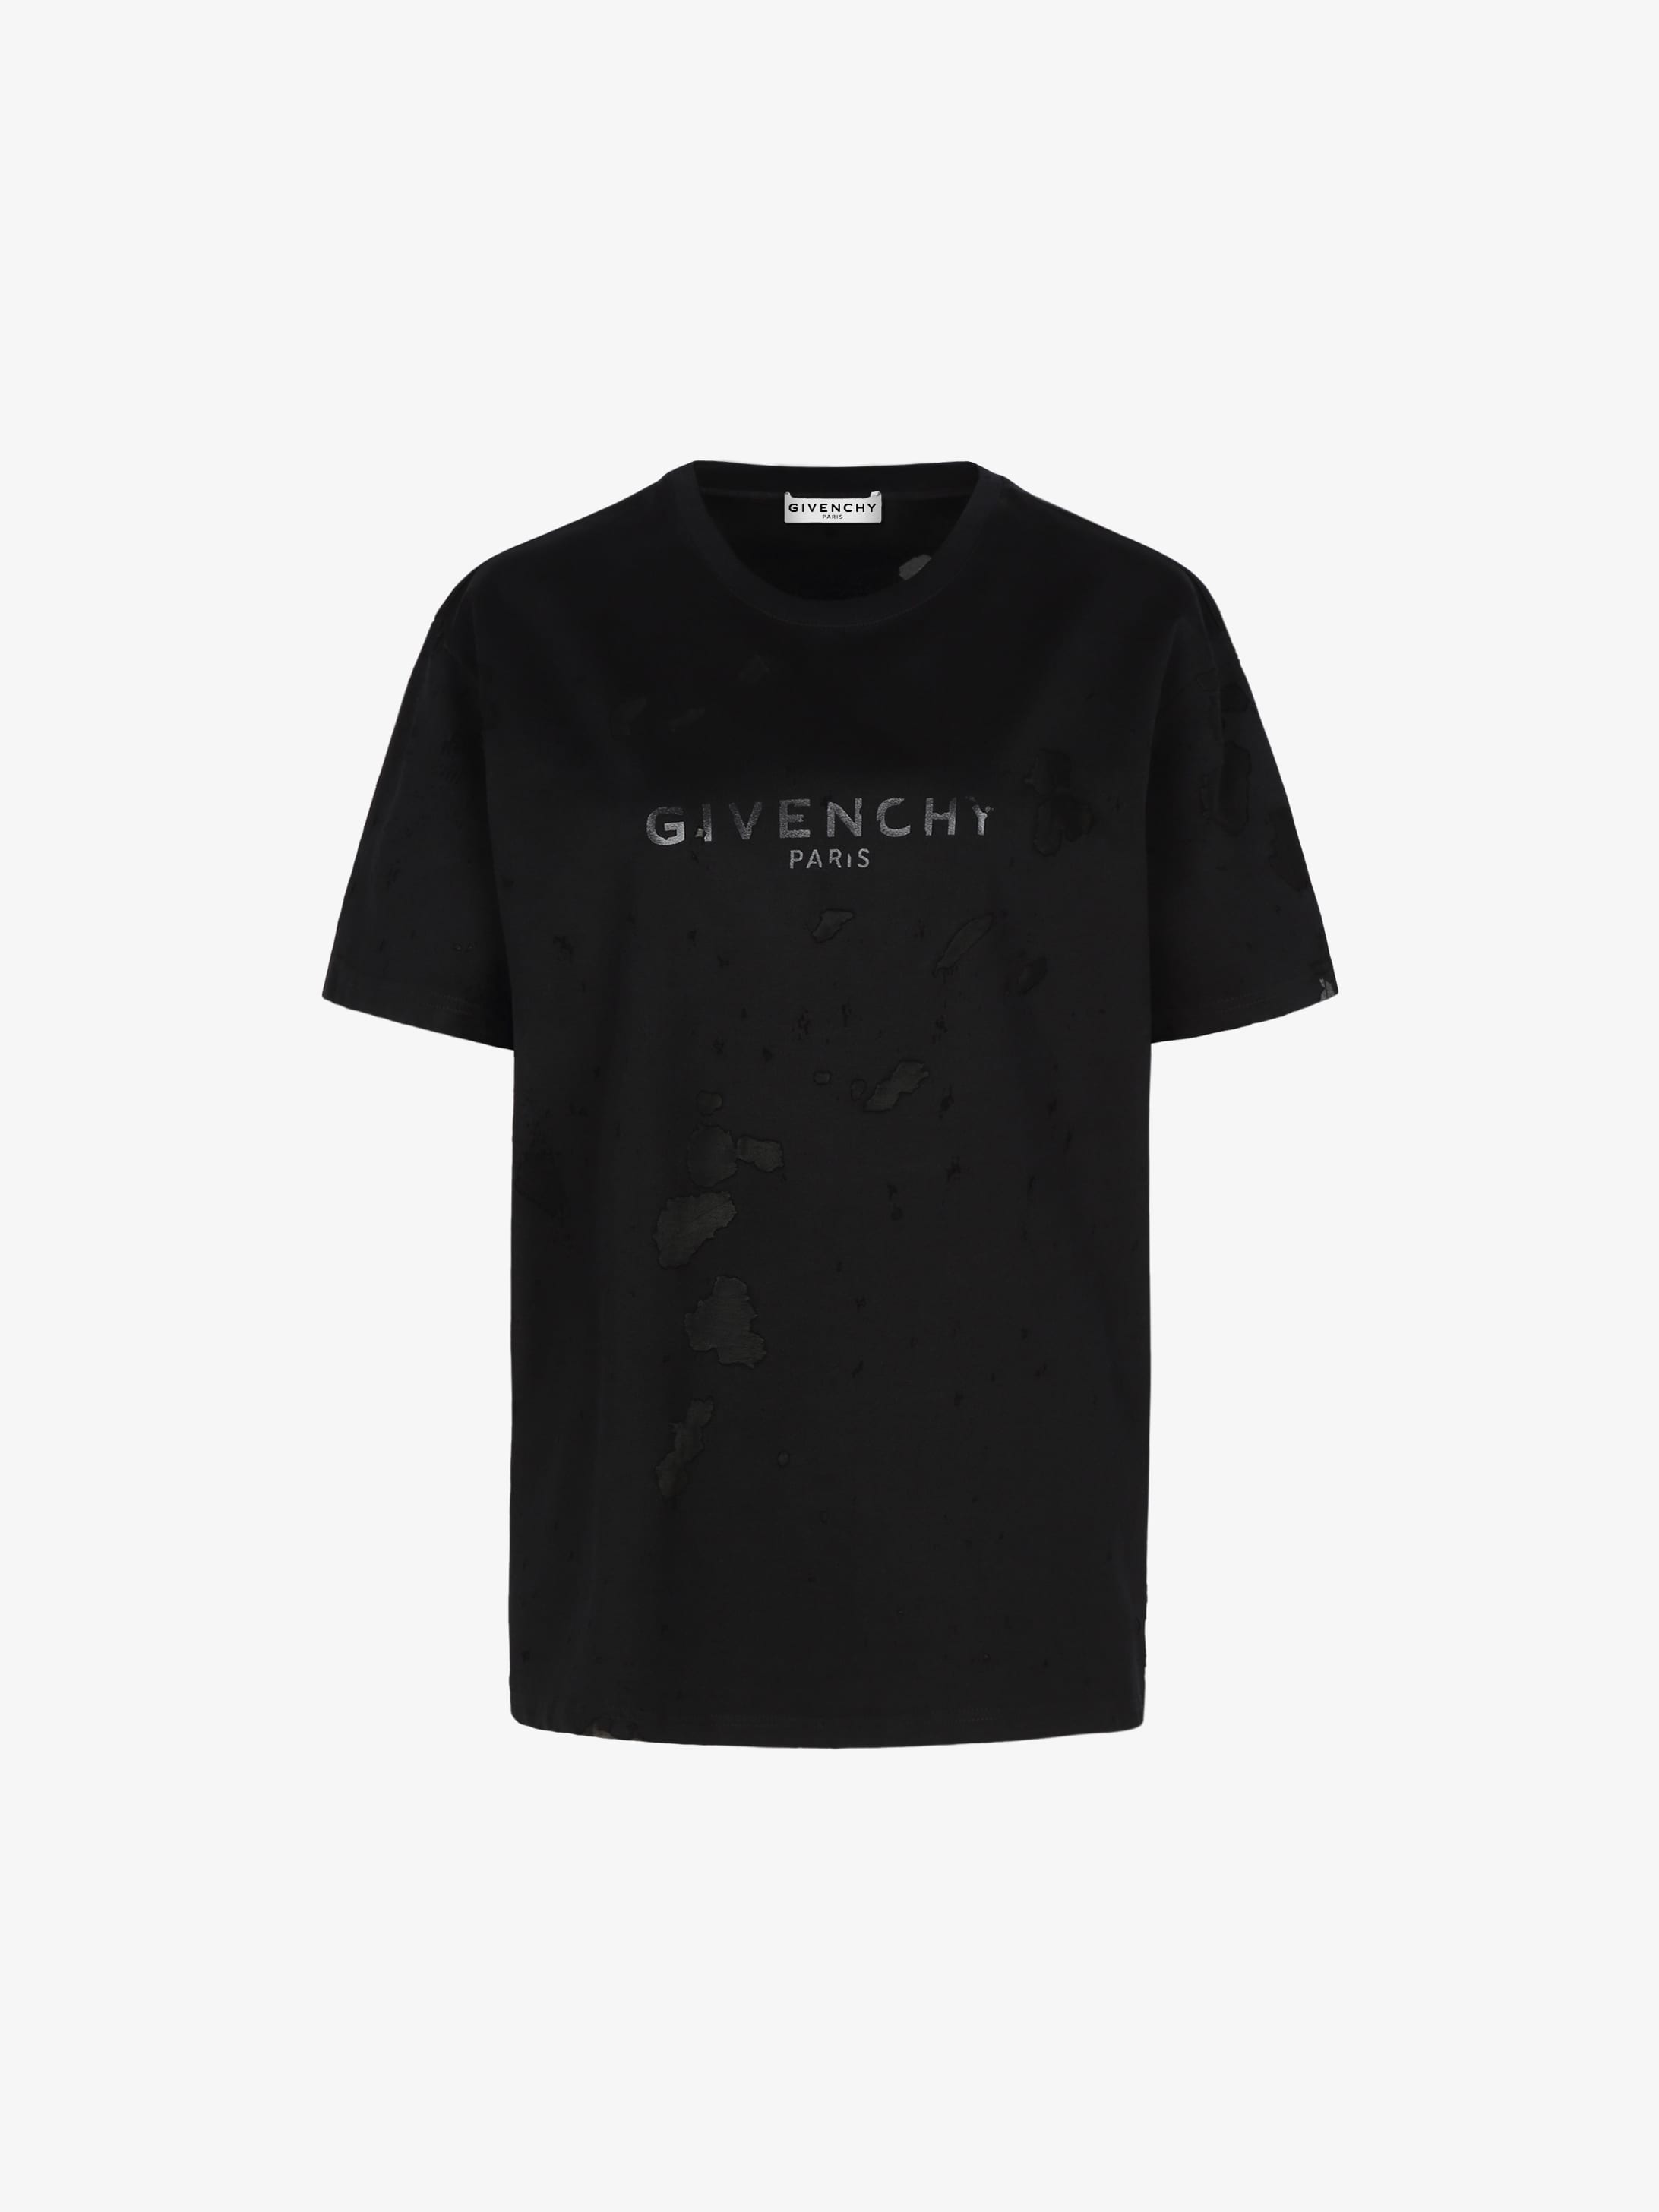 givenchy shirt with holes